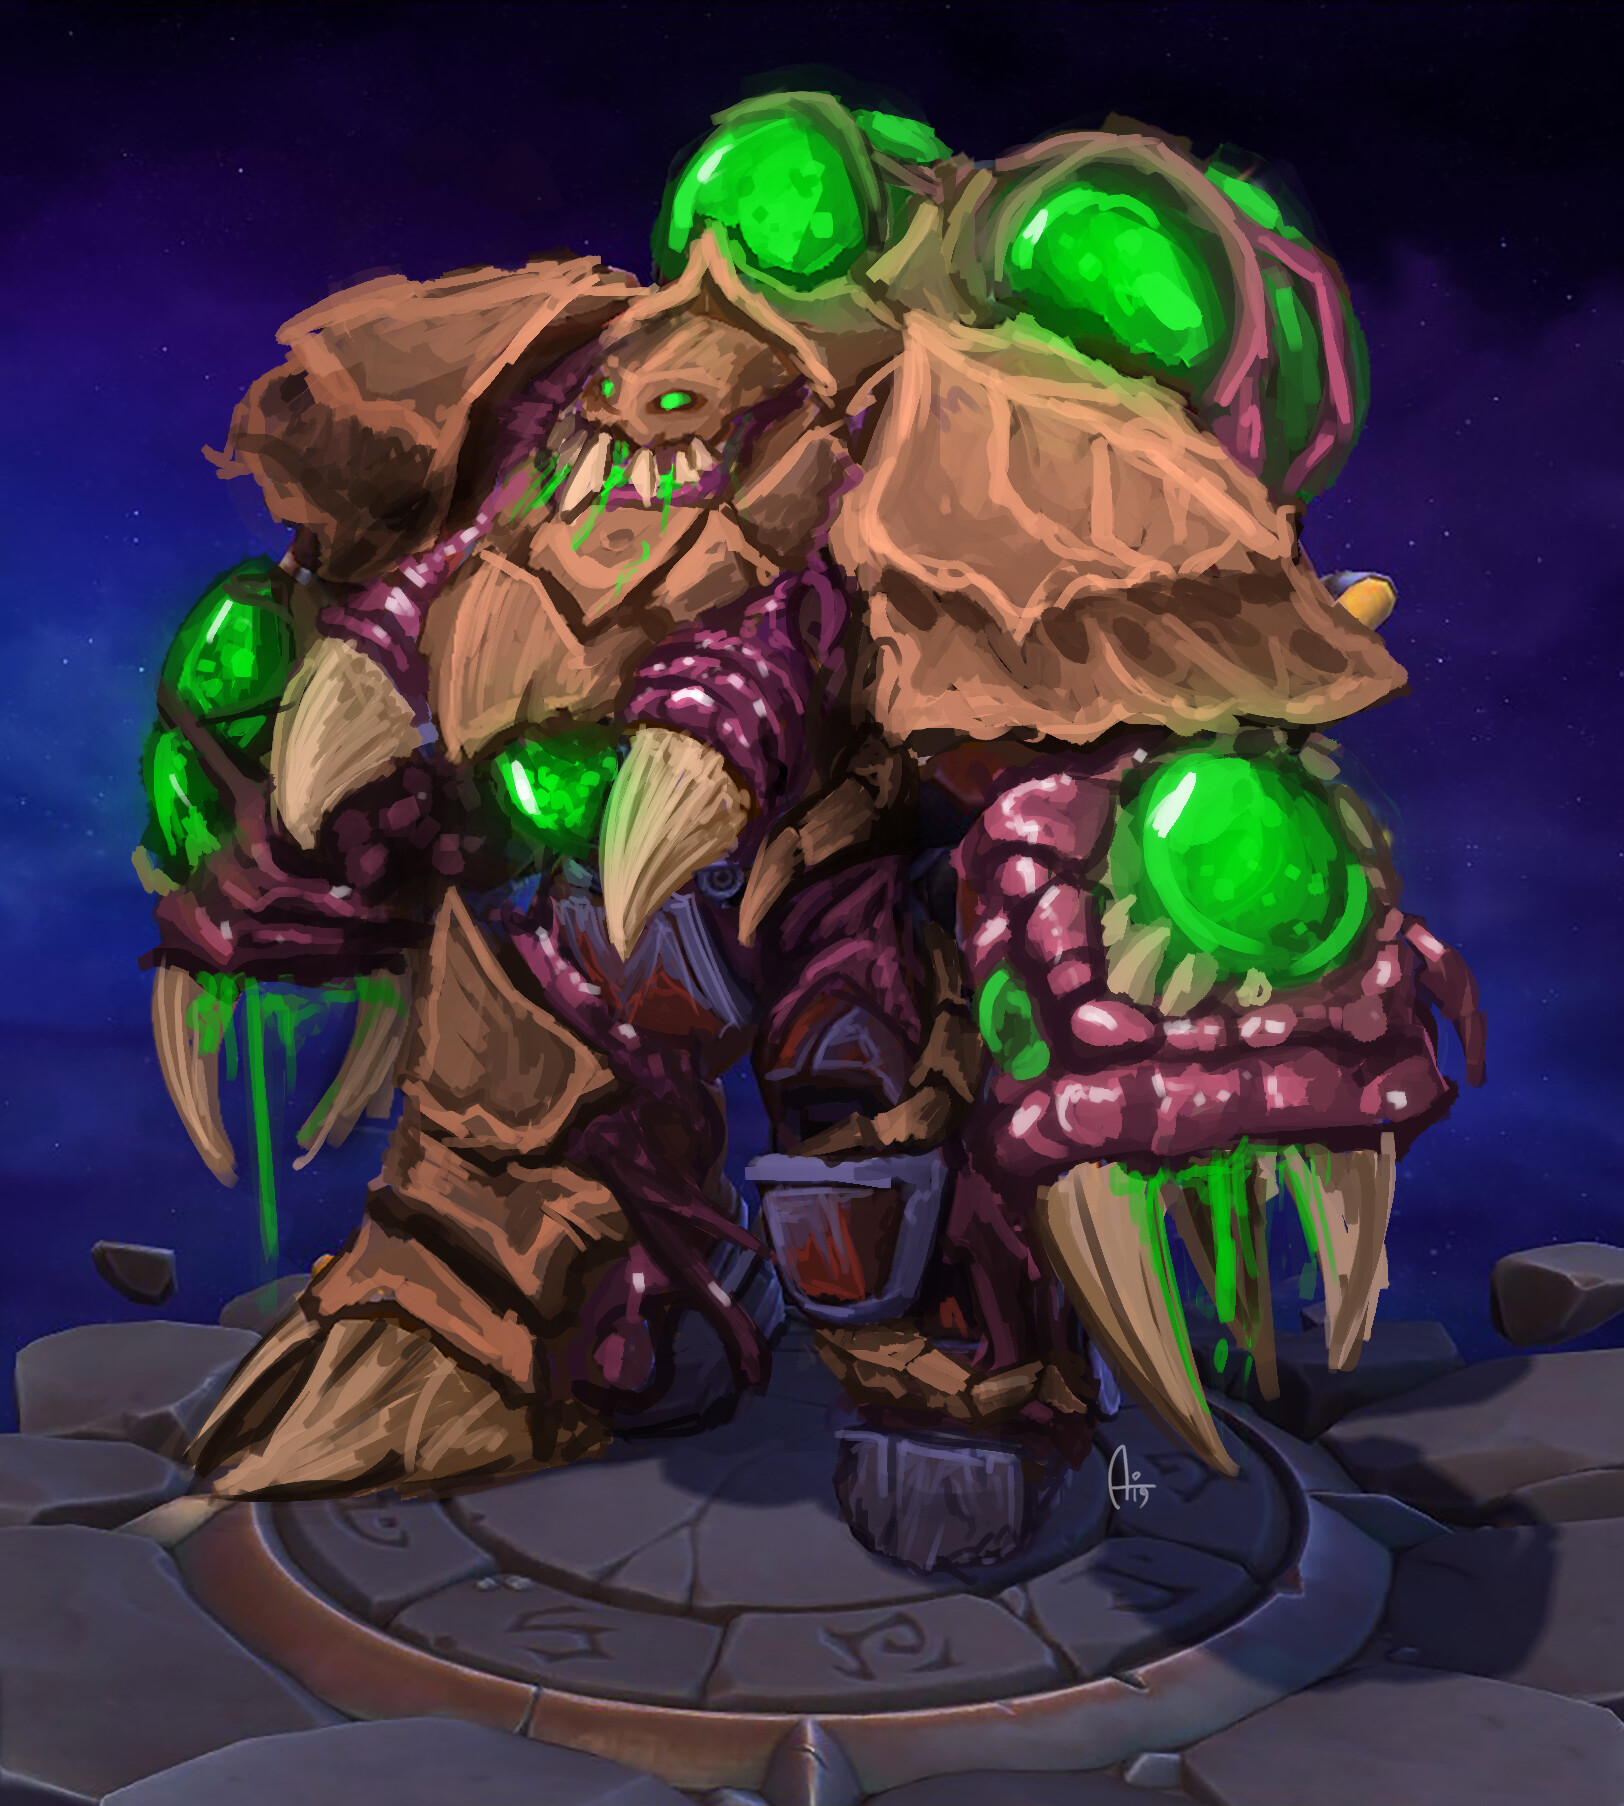 Heroes of the Storm skin concepts make me wish it wasn't in maintenance